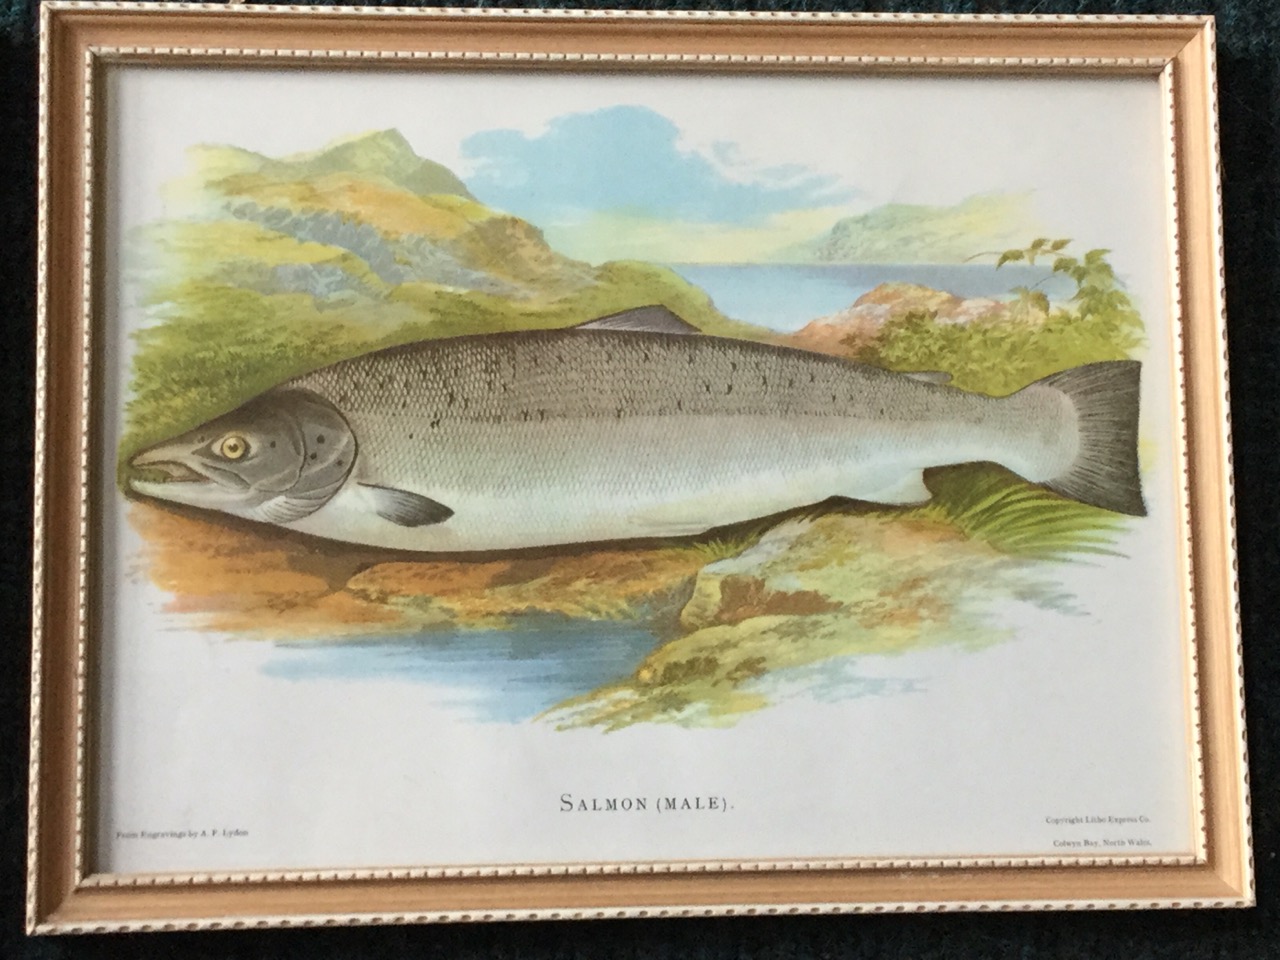 A set of four framed fish prints, Common Trout, Grisle, Galway Seatrout, and Salmon, the coloured - Image 5 of 6